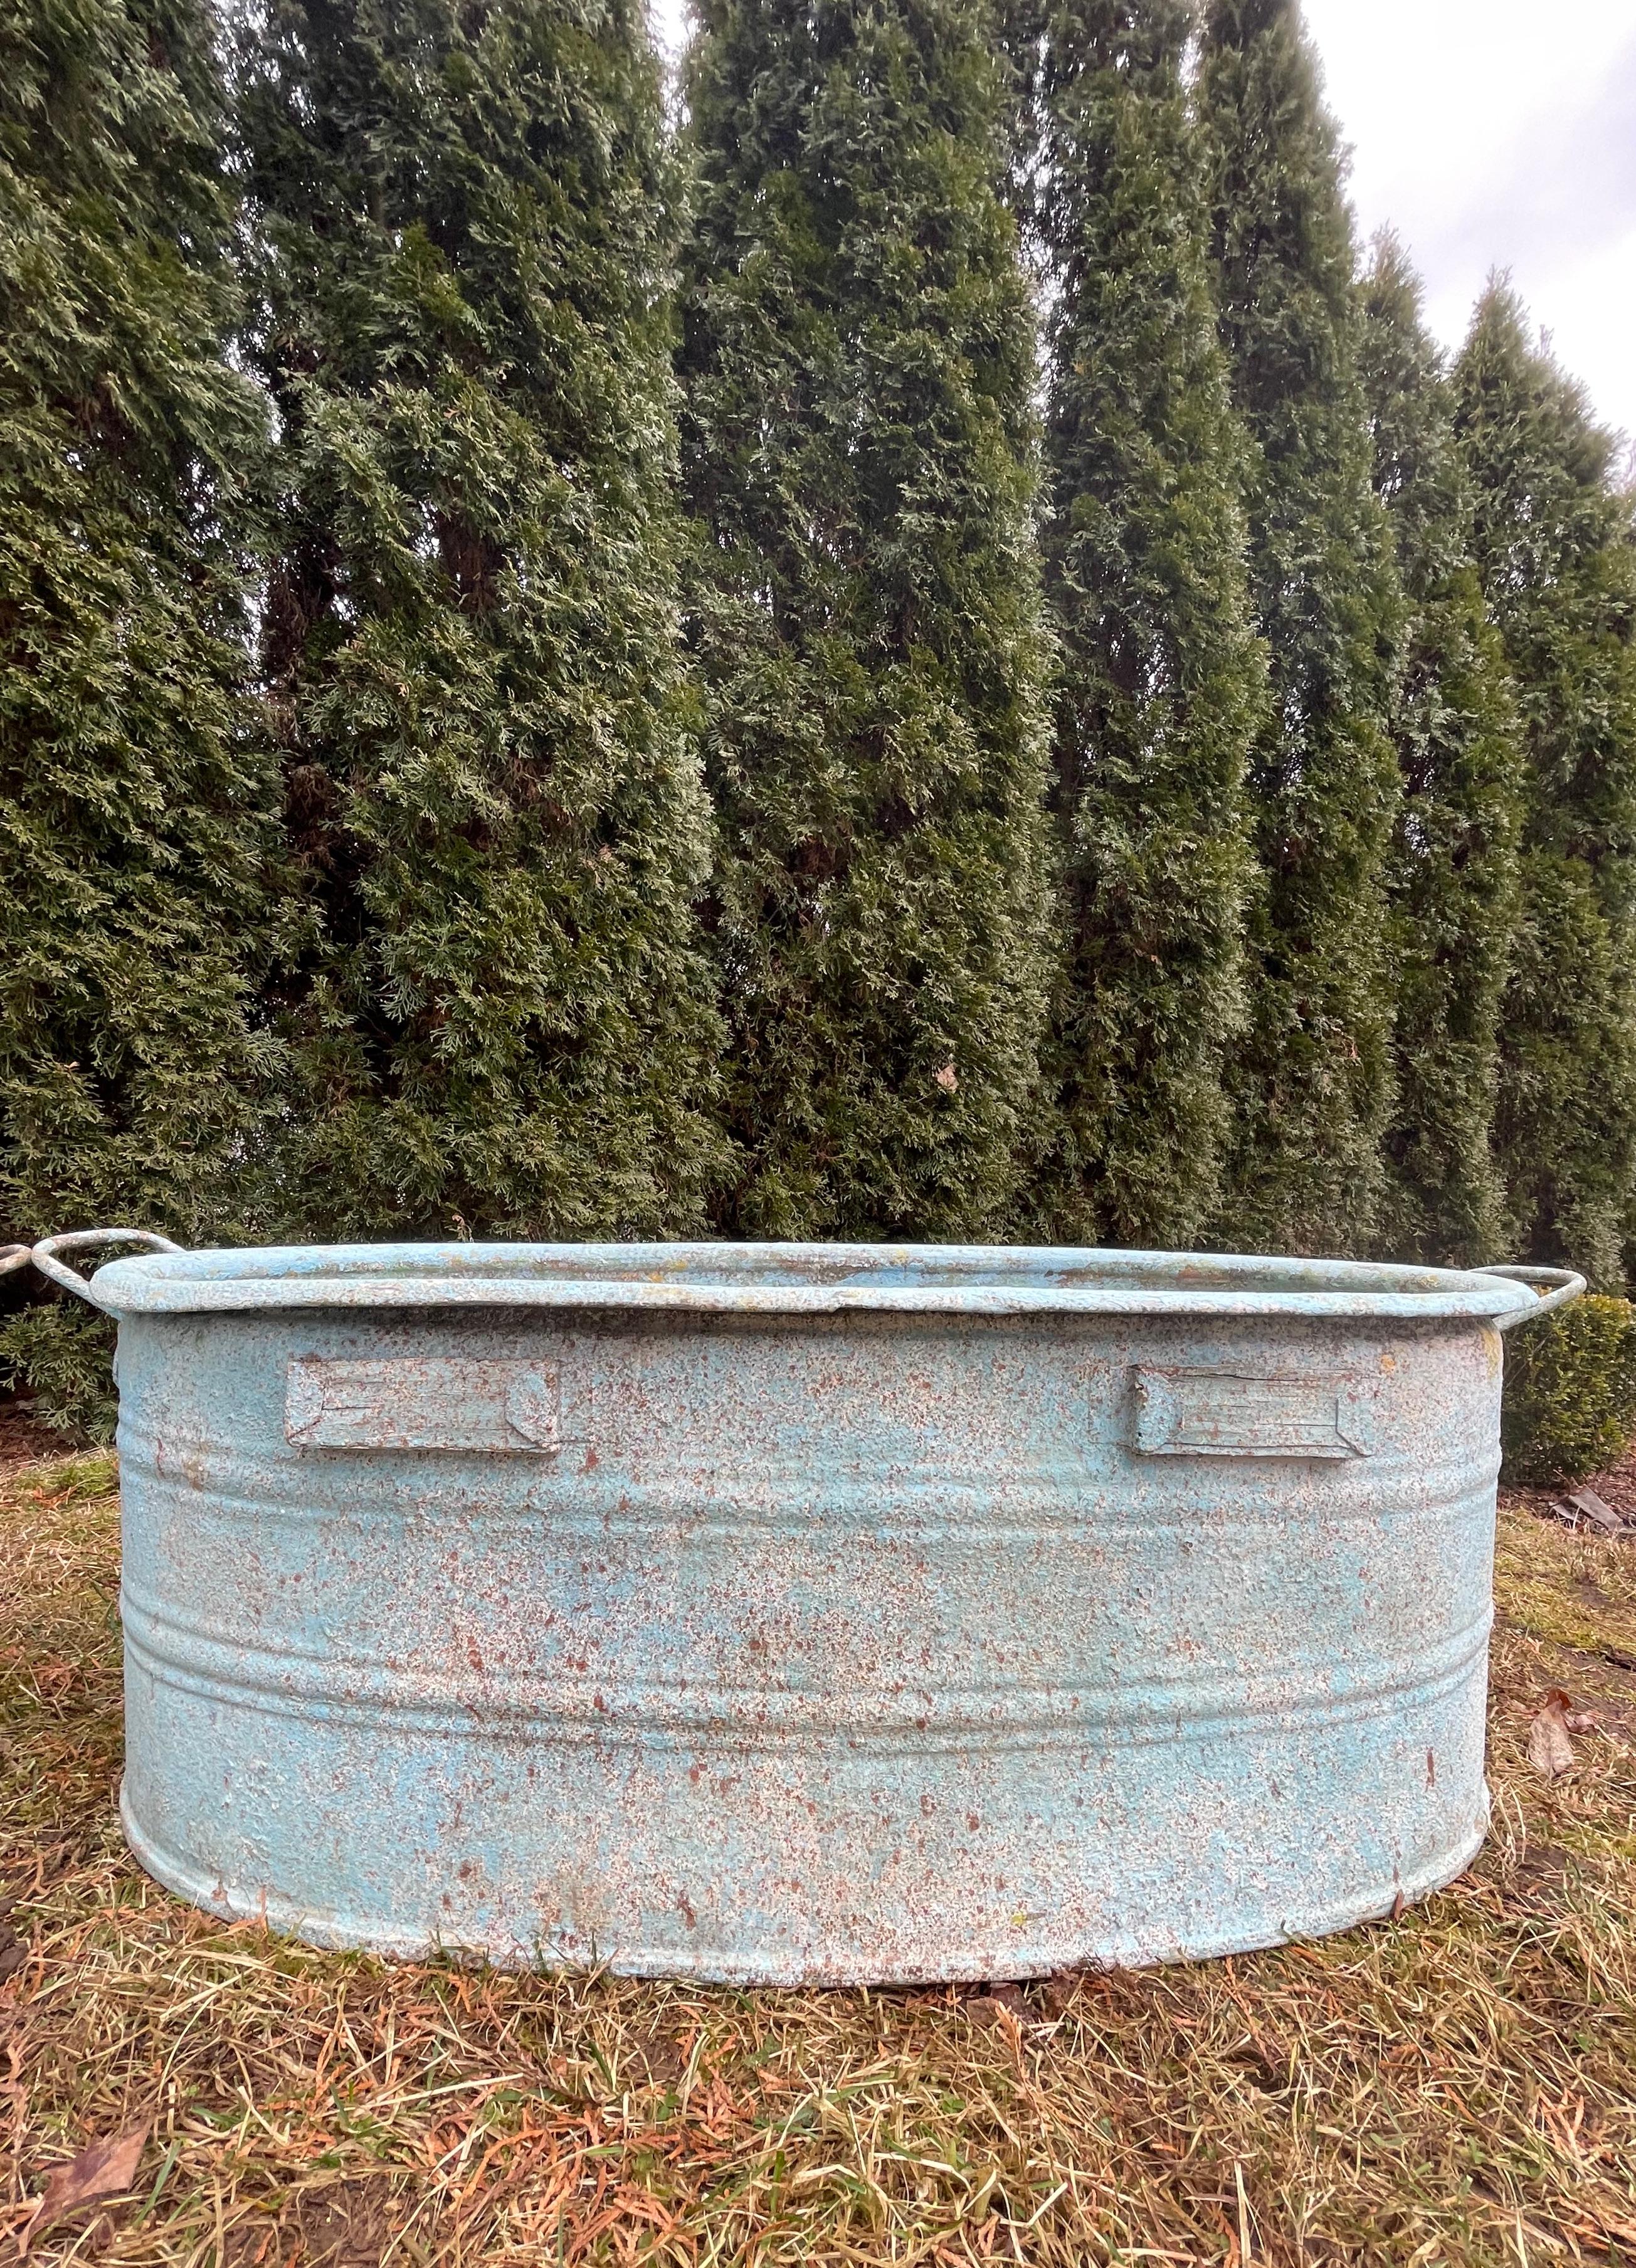 Near-Pair of Very Large German Oval Galvanized Planters #3 with Custom Surface In Good Condition For Sale In Woodbury, CT